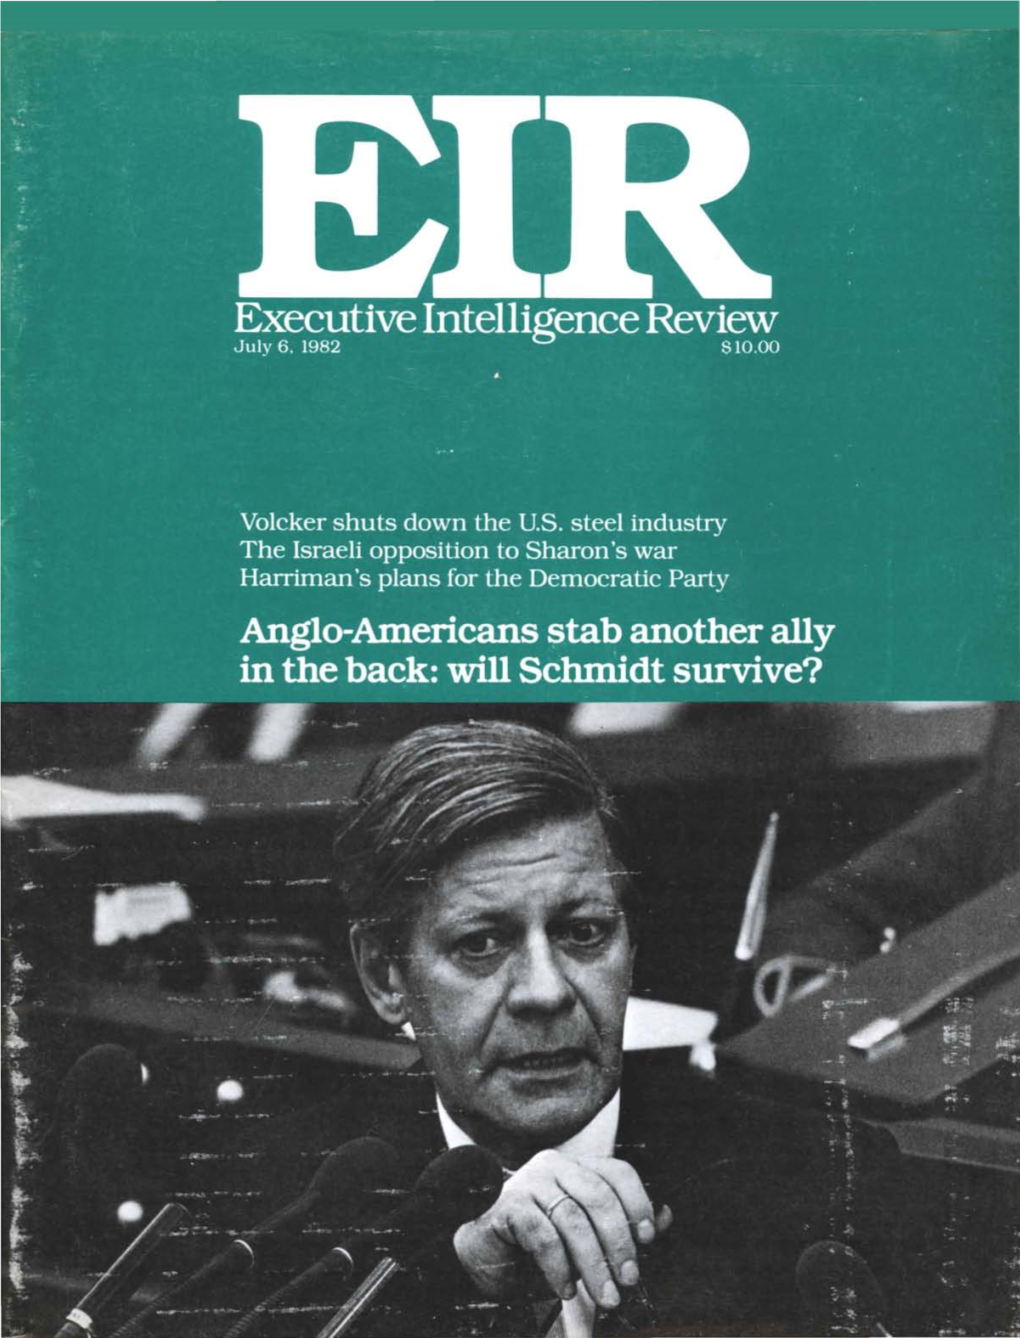 Executive Intelligence Review, Volume 9, Number 26, July 6, 1982